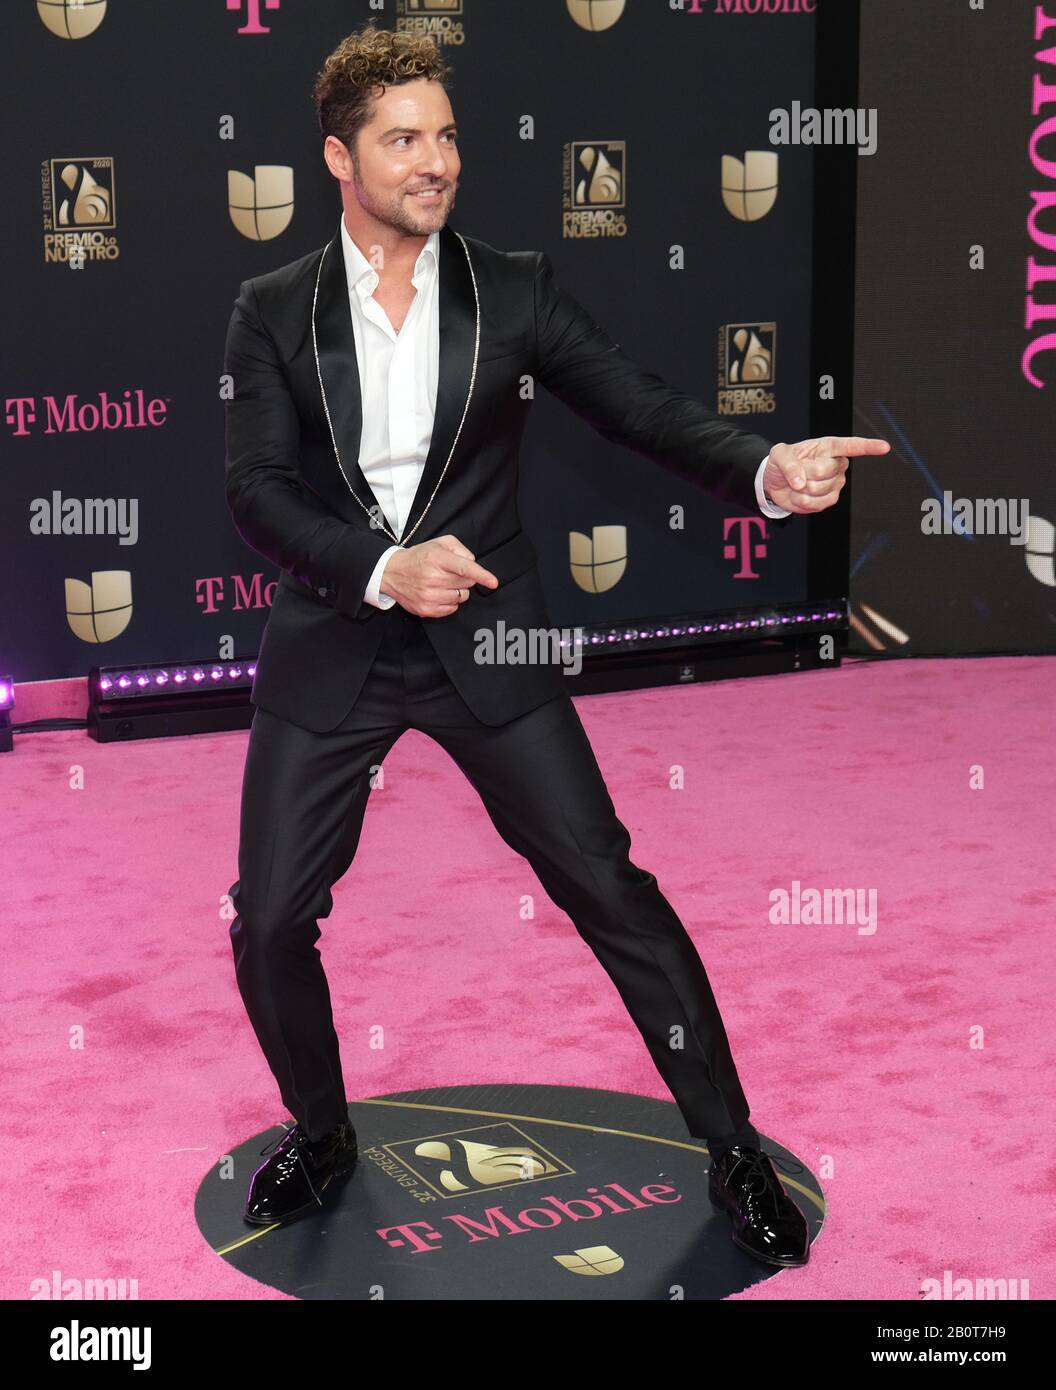 Miami, United States. 21st Feb, 2020. David Bisbal walks the red carpet at the Univision 2020 Premio Lo Nuestro award show at the American Airlines Arena in Miami, Florida, Thursday, February 20, 2020. Photo by Gary I Rothstein/UPI Credit: UPI/Alamy Live News Stock Photo